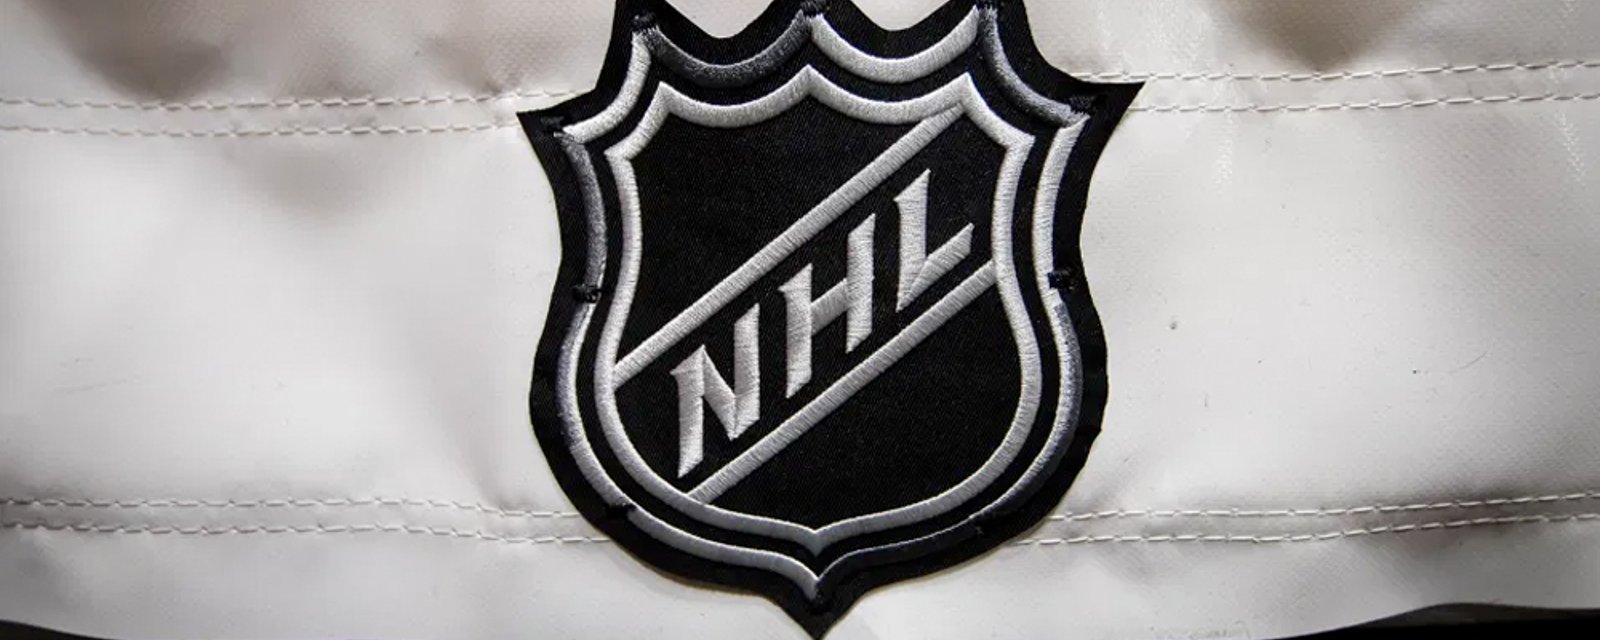 ICYMI: NHL planning to return in June/July